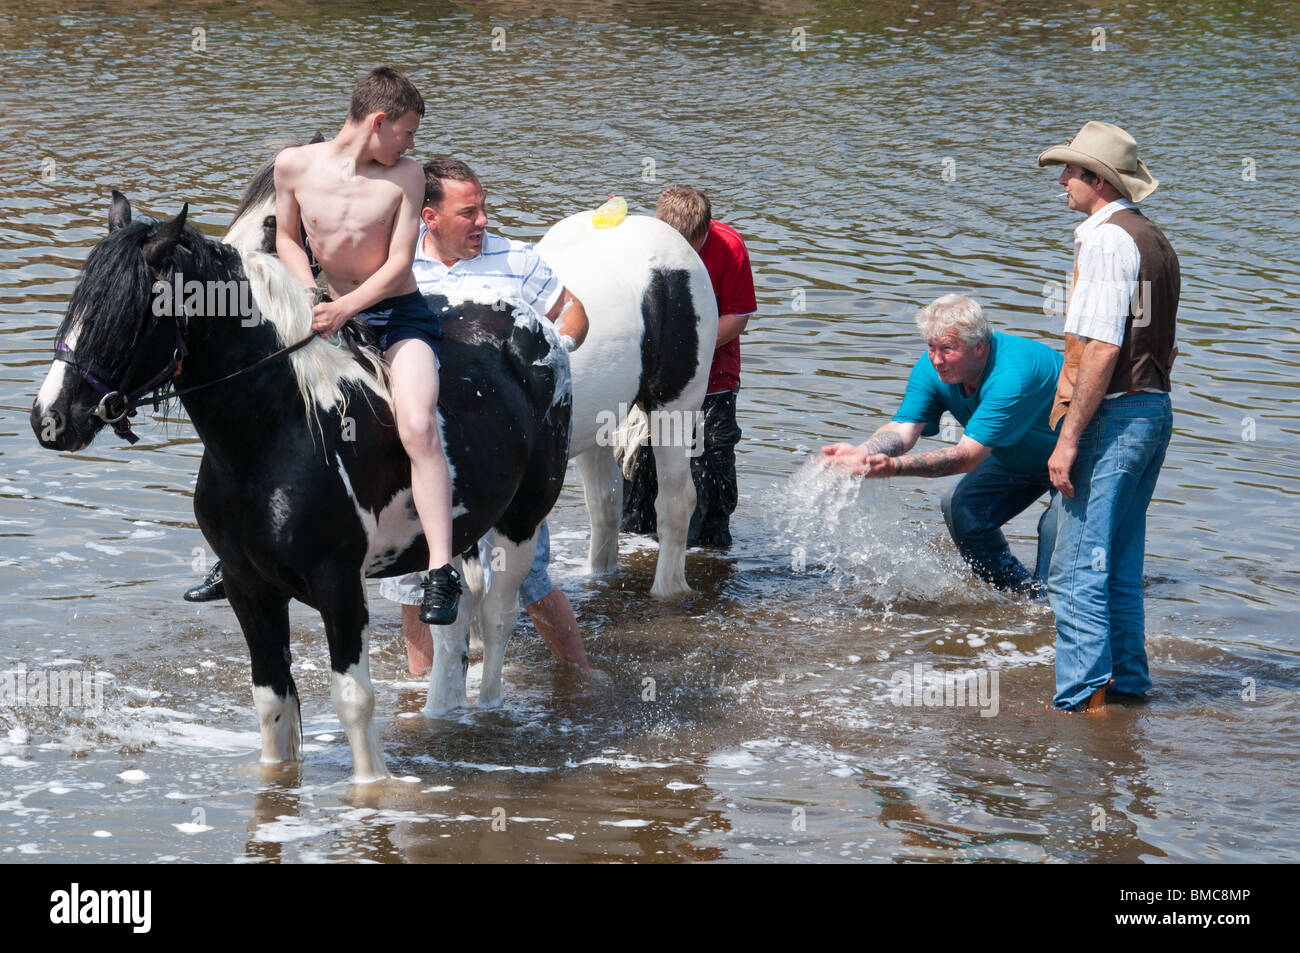 A group of travelers splashing in the river in Middleham, on their way to Appleby Horse Fair Stock Photo